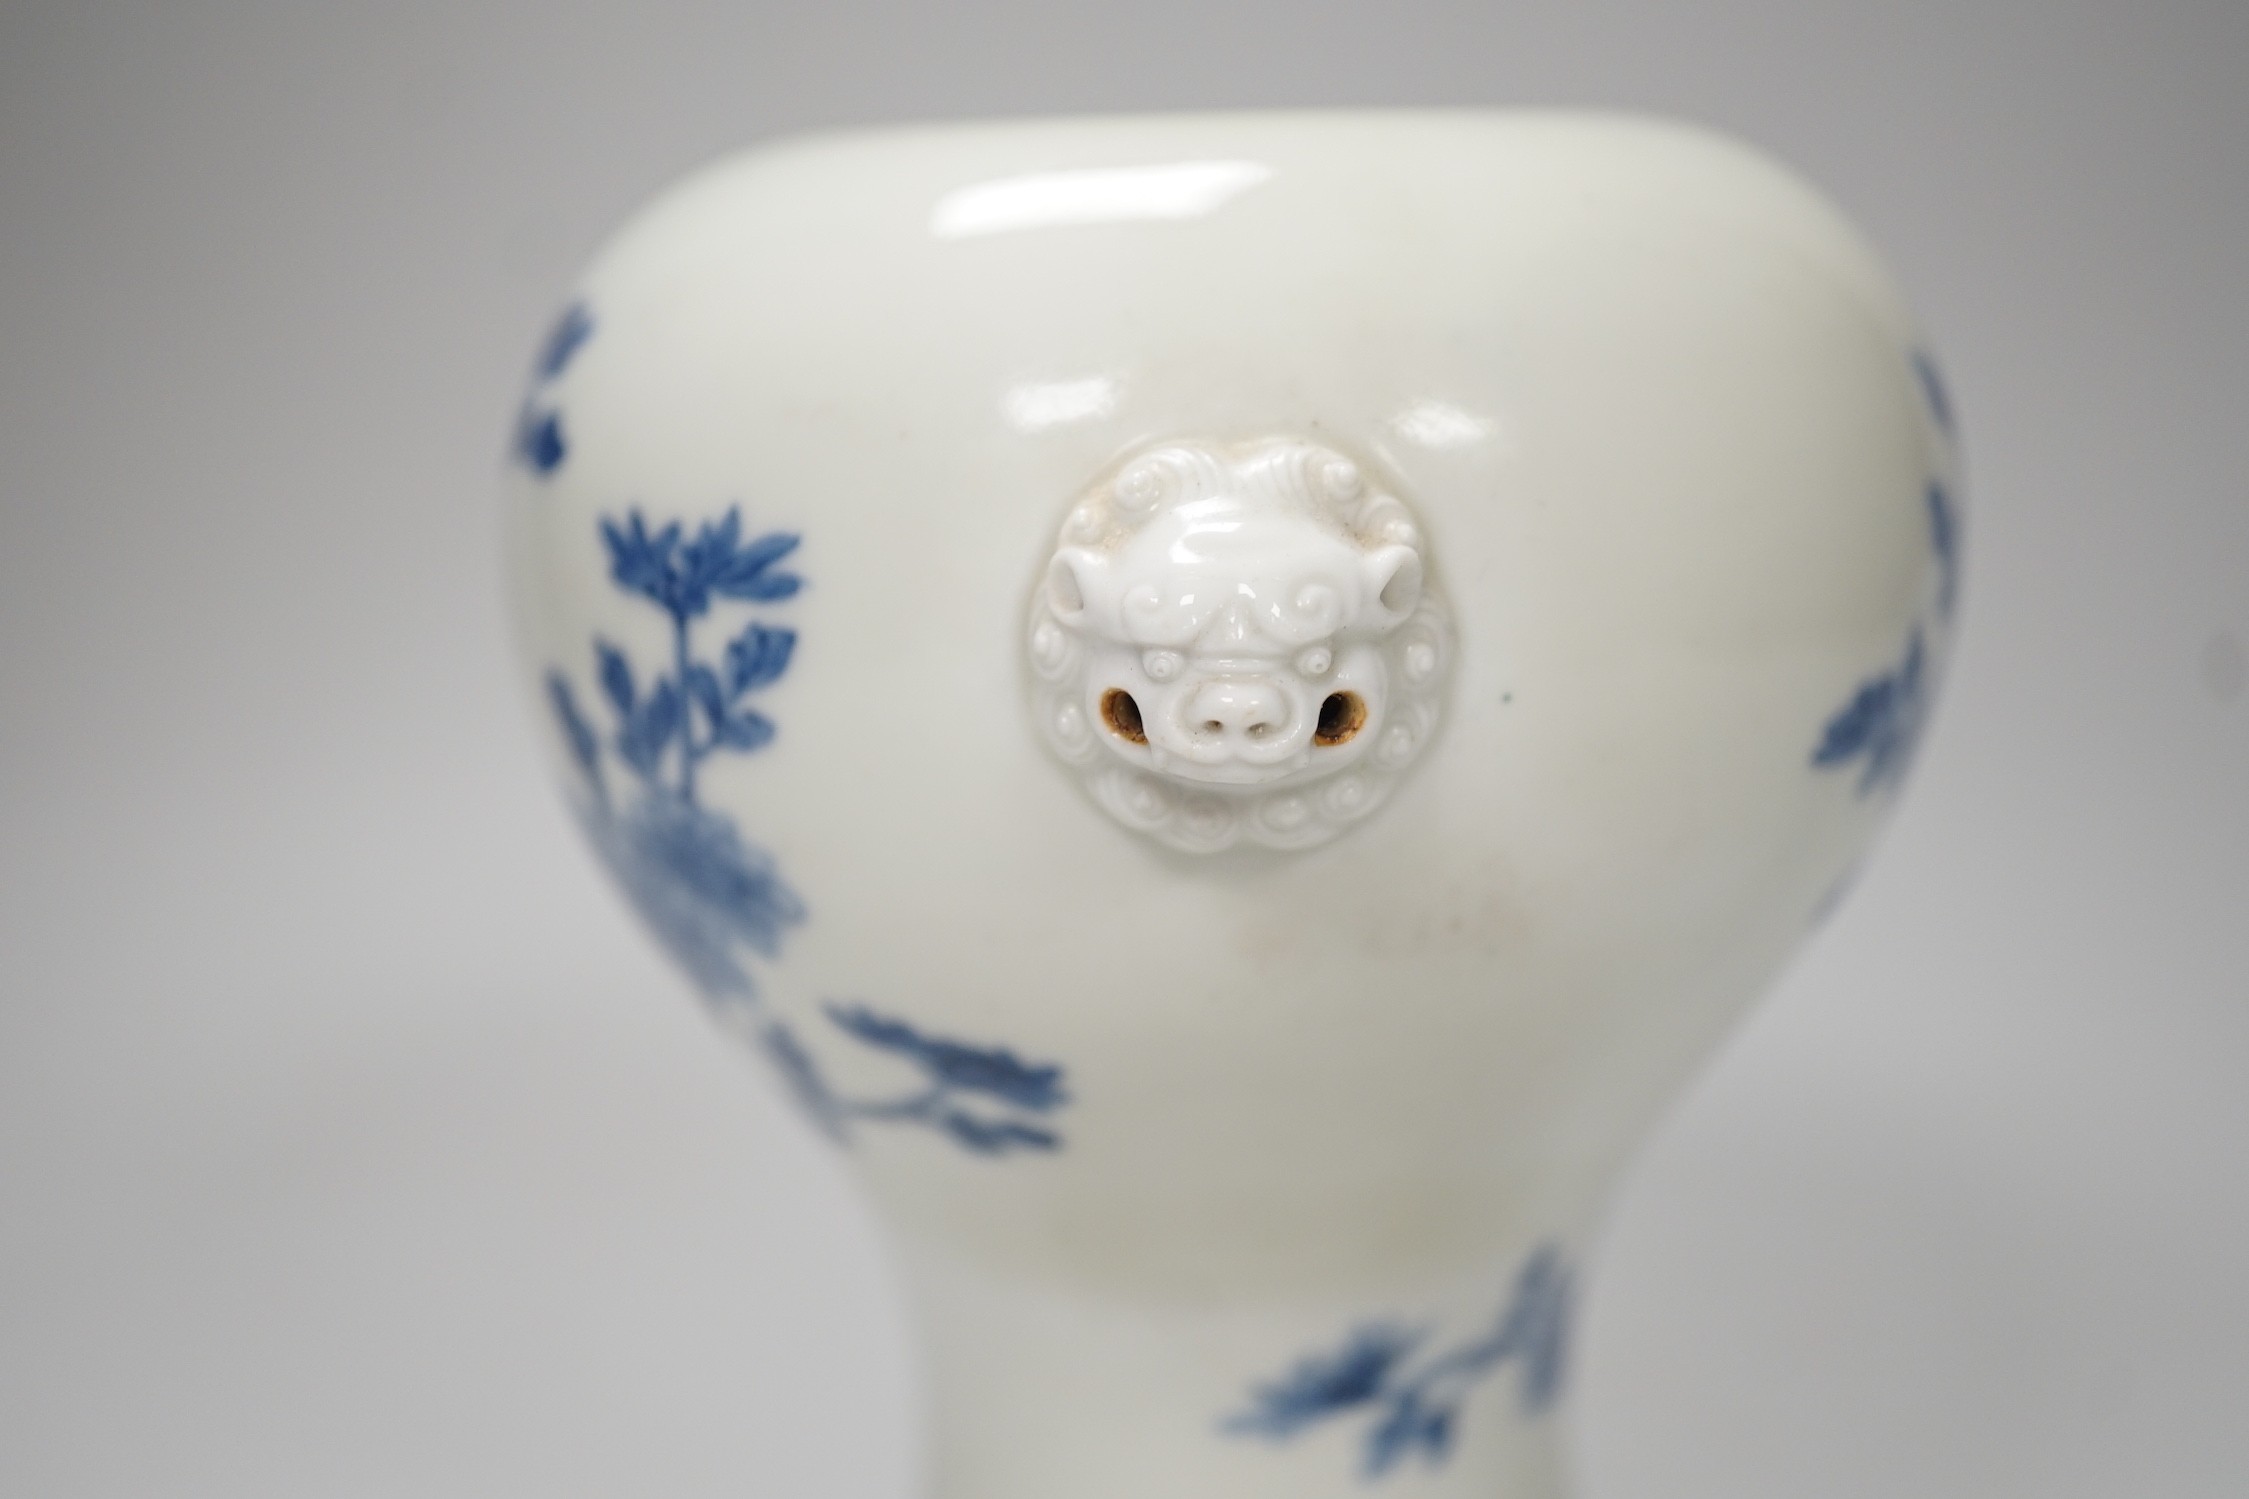 A Japanese blue and white vase, Meiji period, possibly Hirado, with lion mask handles. 13cm high